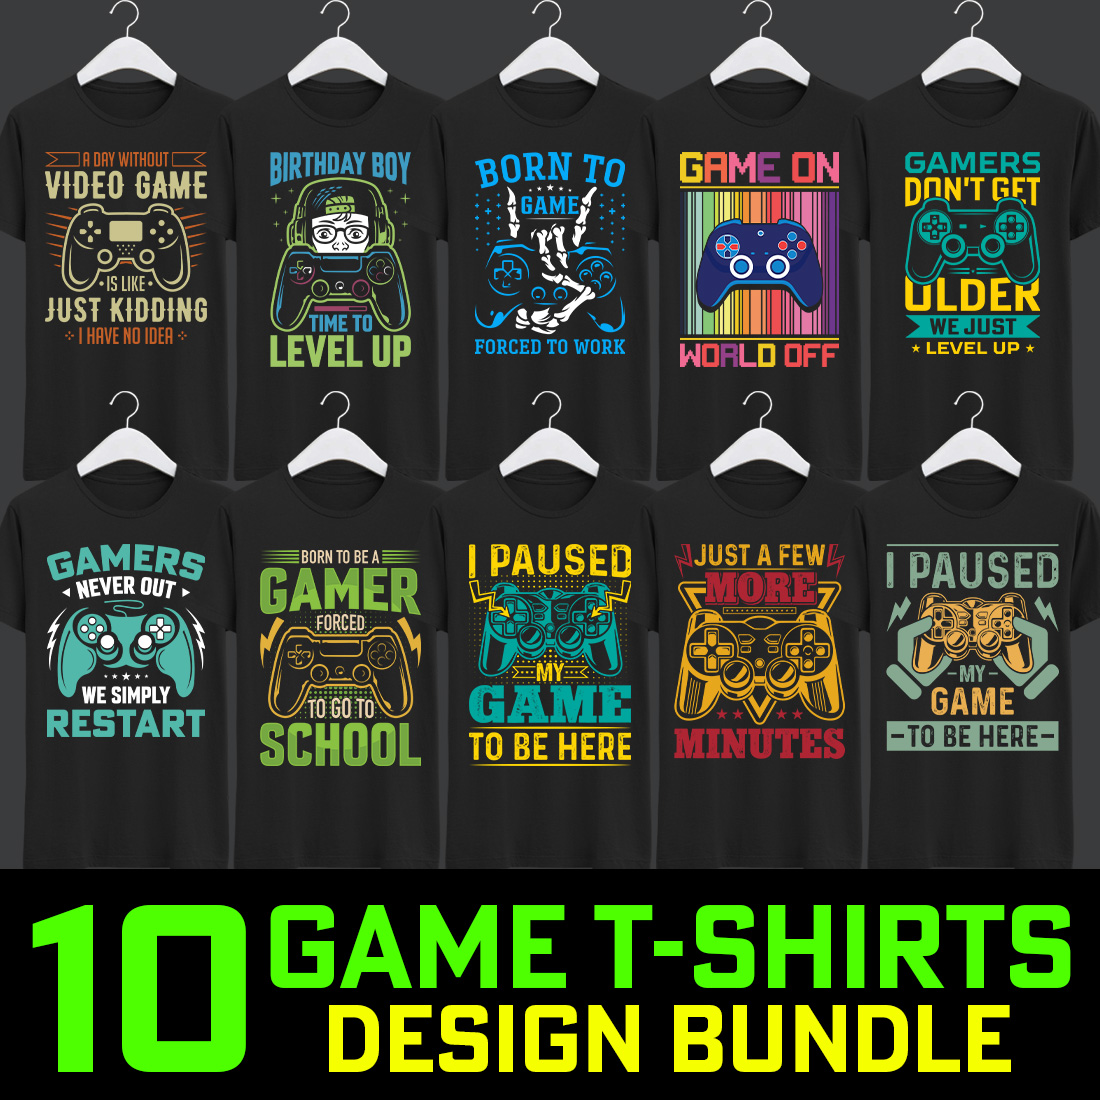 Best Gaming T-shirts Design Bundle for Game Lover cover image.